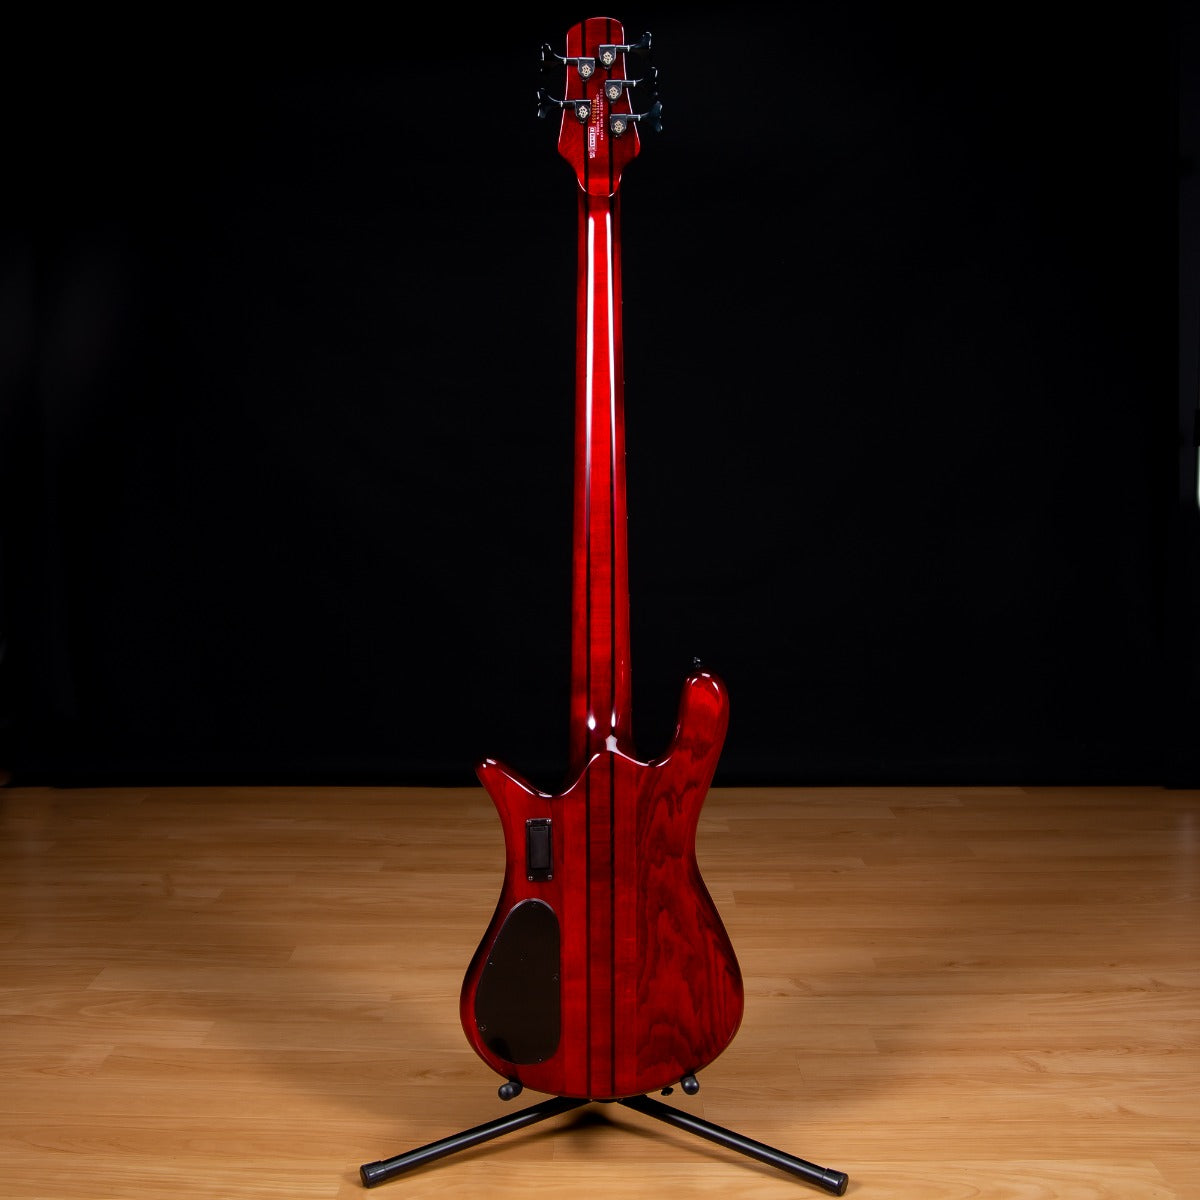 Spector NS Dimension 5 Bass Guitar - Inferno Red Gloss view 10